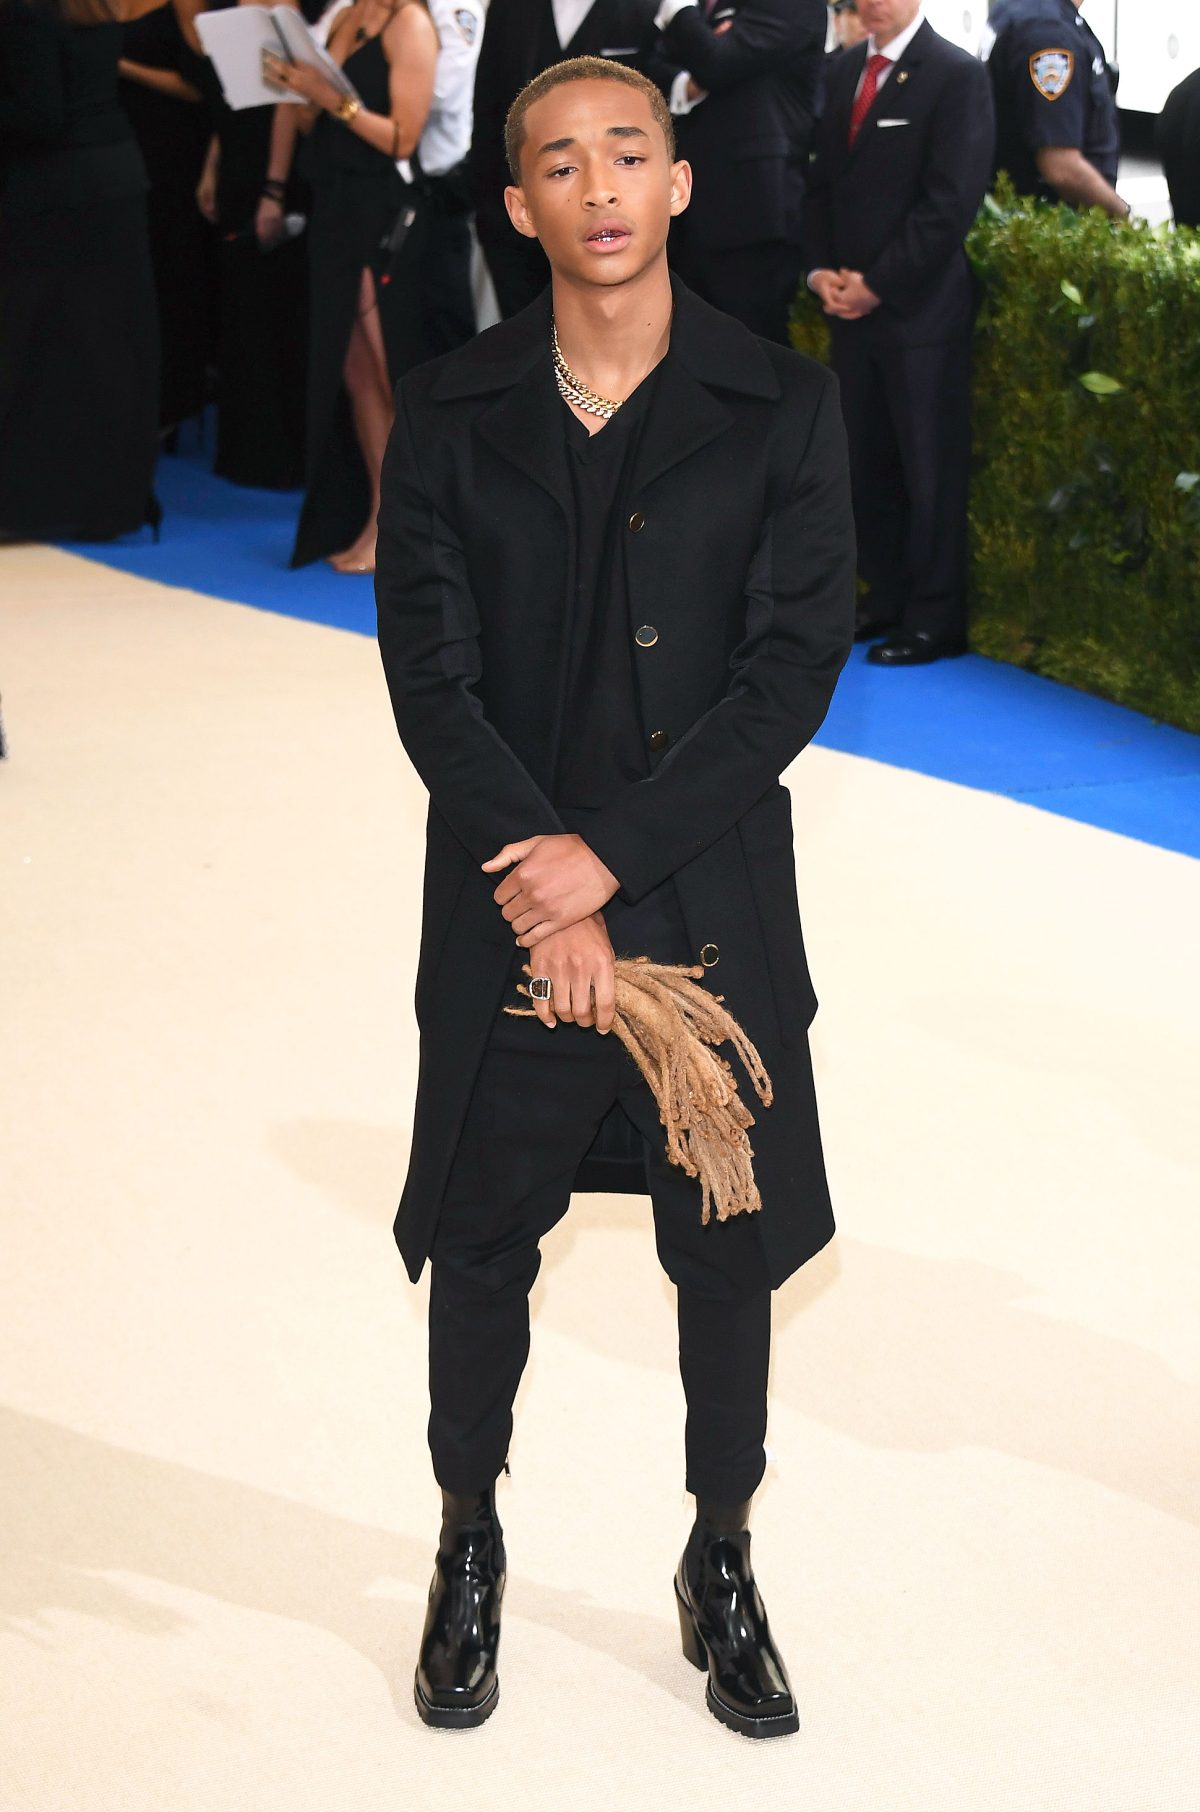 Jaden Smith's Best Style: The Edgy Moments From 2018 So Far – Footwear News